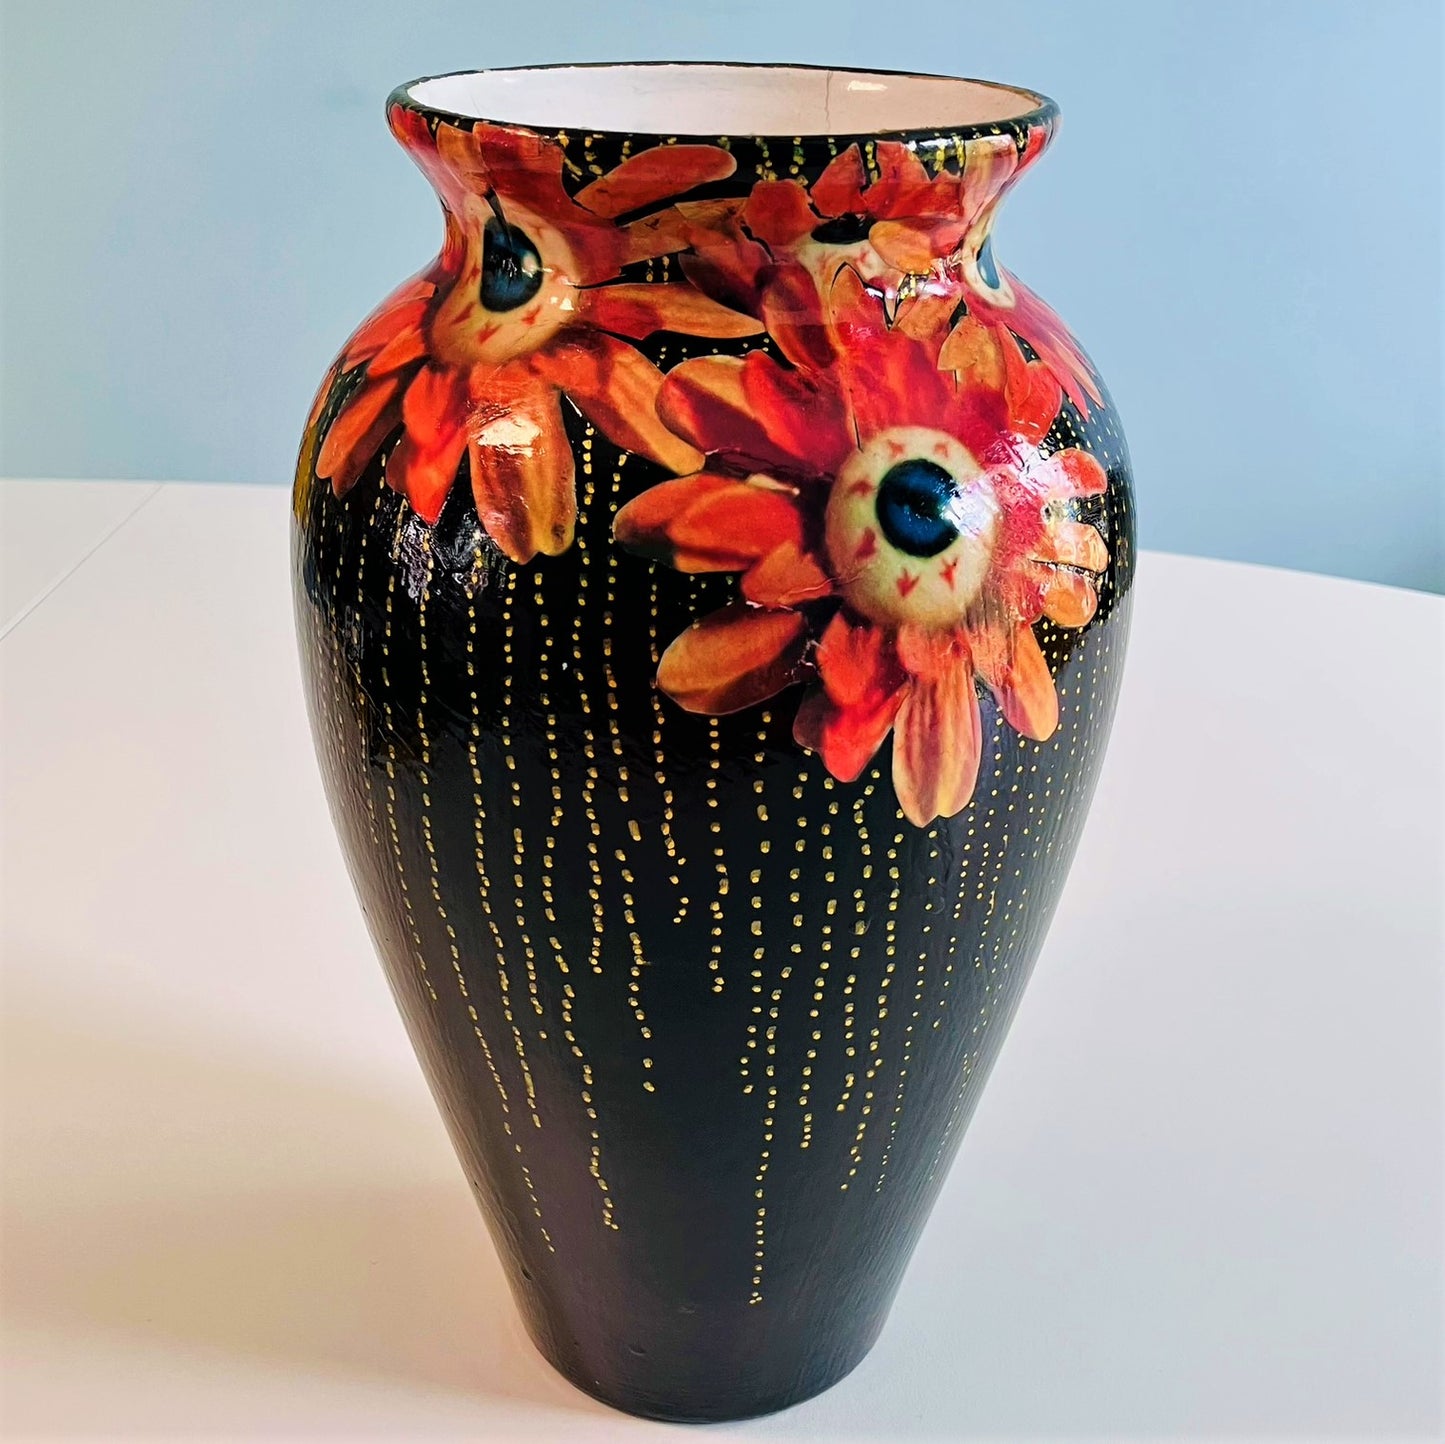 "Starey Flowers" Flower Vase by House of Frisson, featuring a collage of flowers with eyeballs, on a black background. Different angle of the vase.